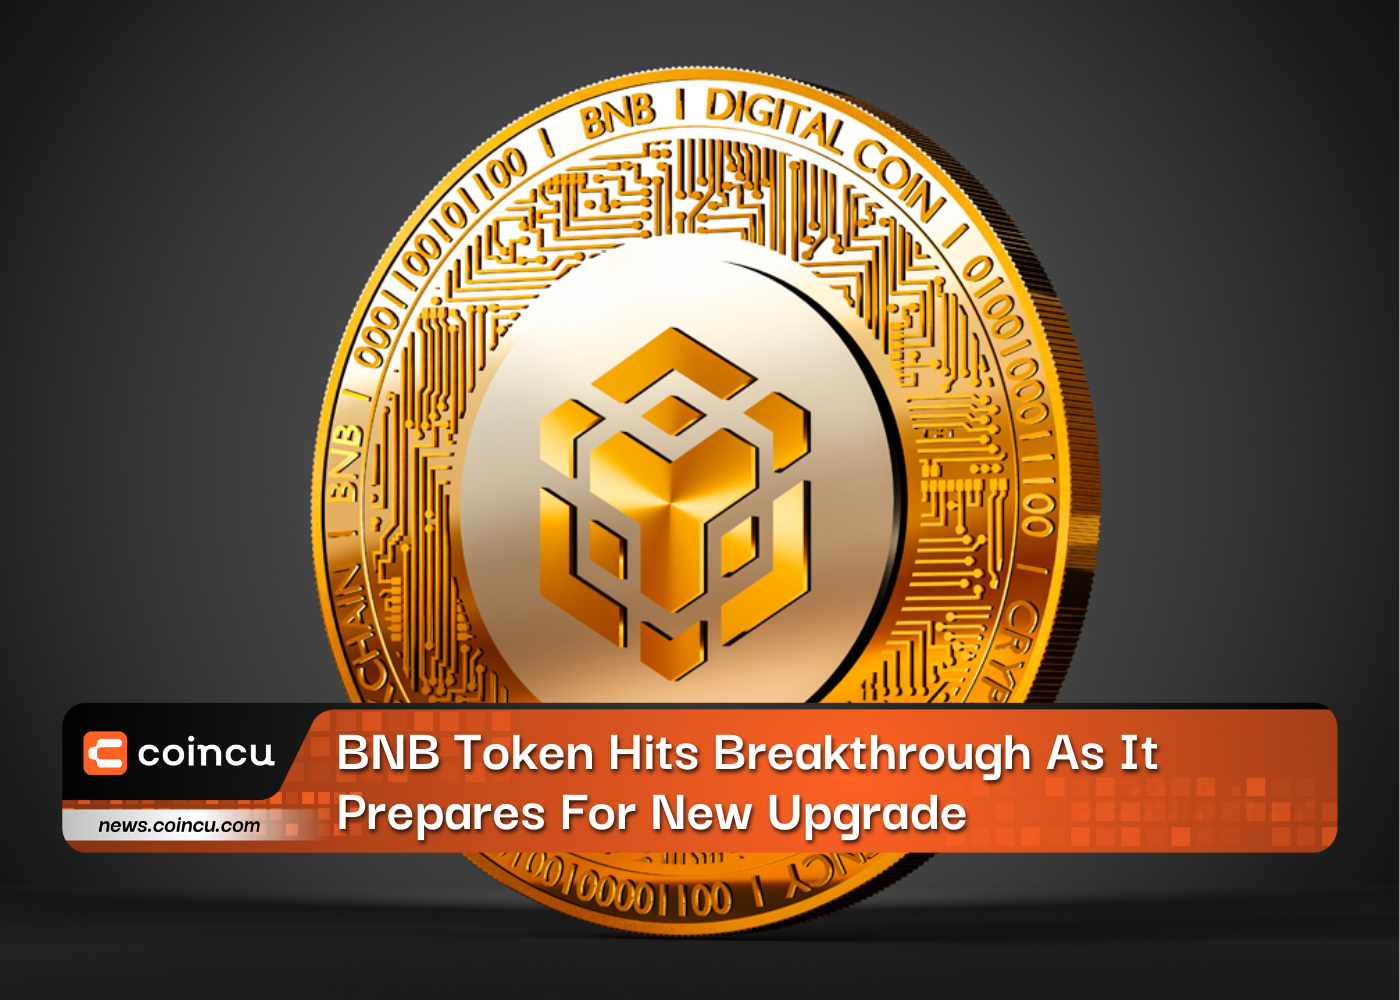 BNB Token Hits Breakthrough As It Prepares For New Upgrade